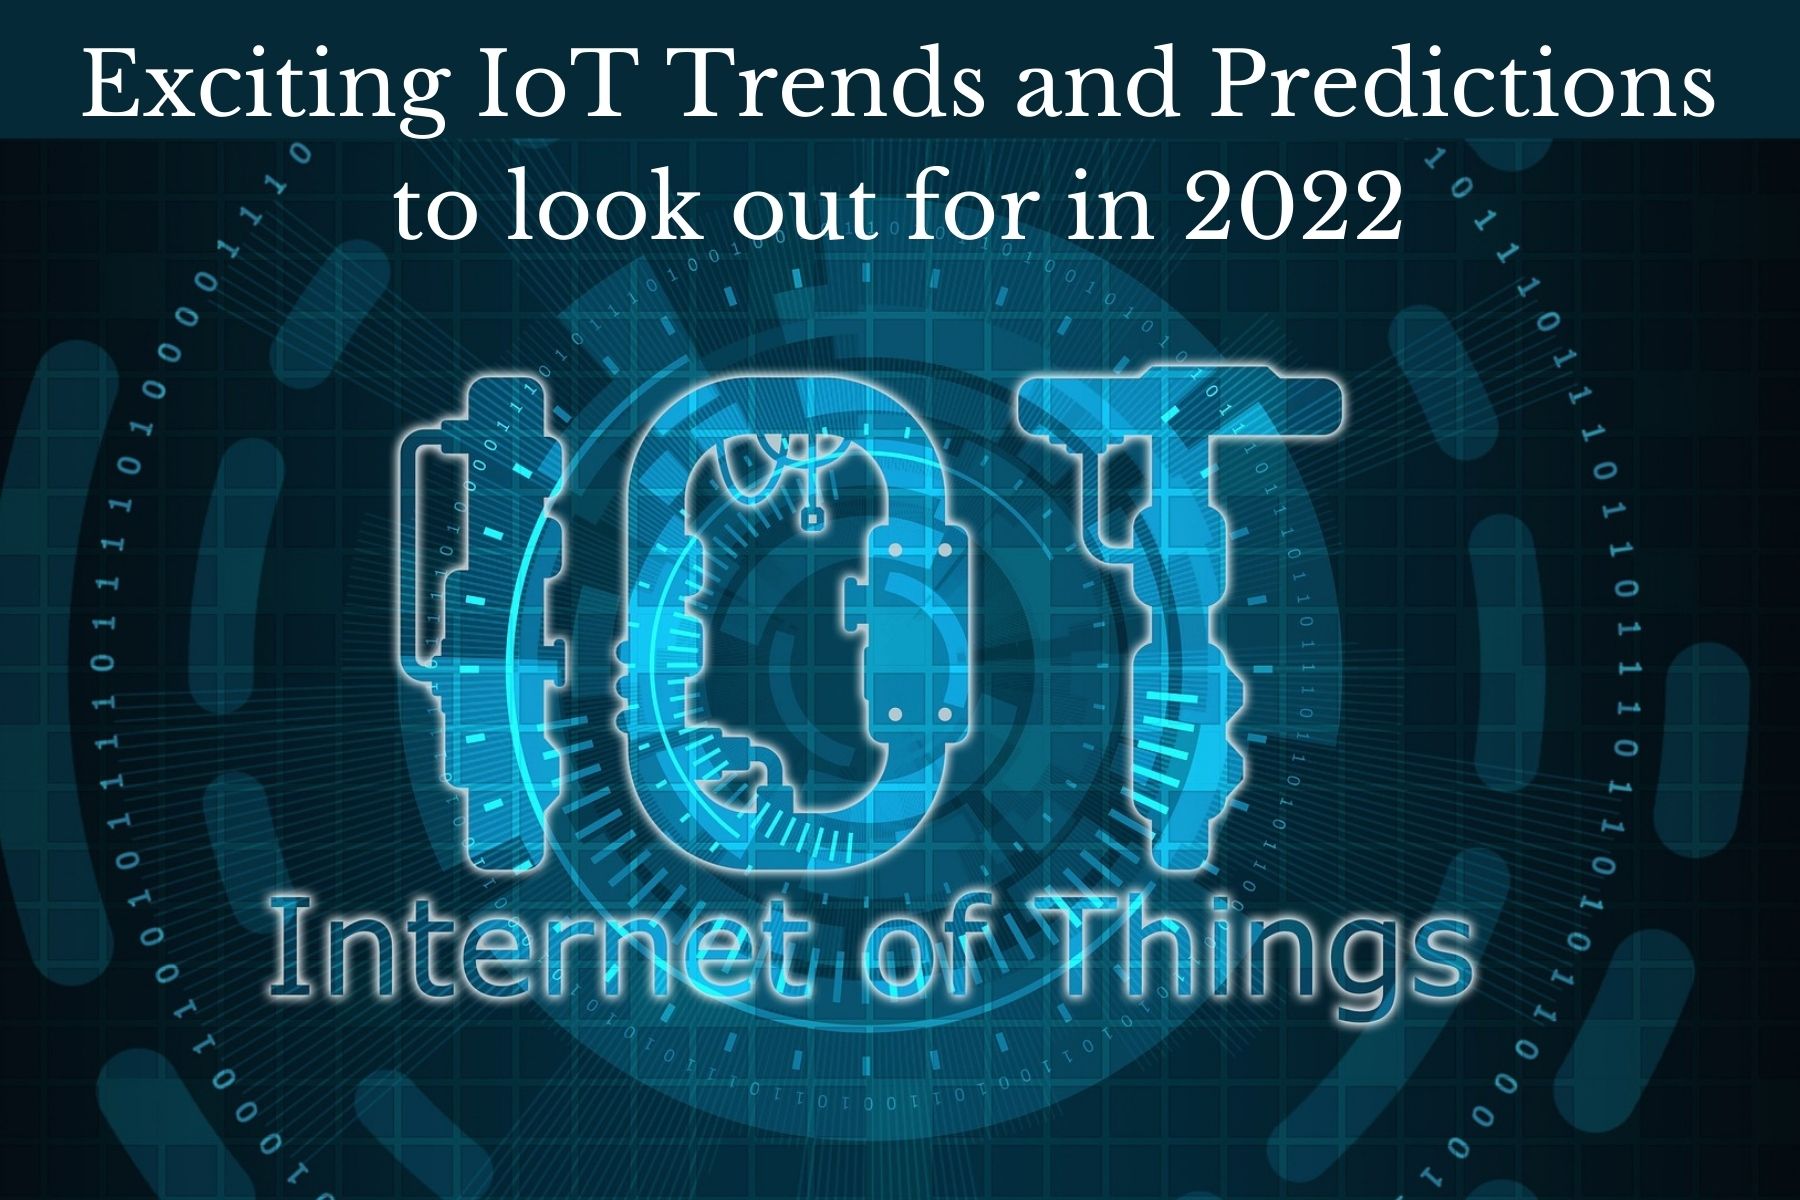 Exciting IoT Trends and Predictions to look out for in 2022